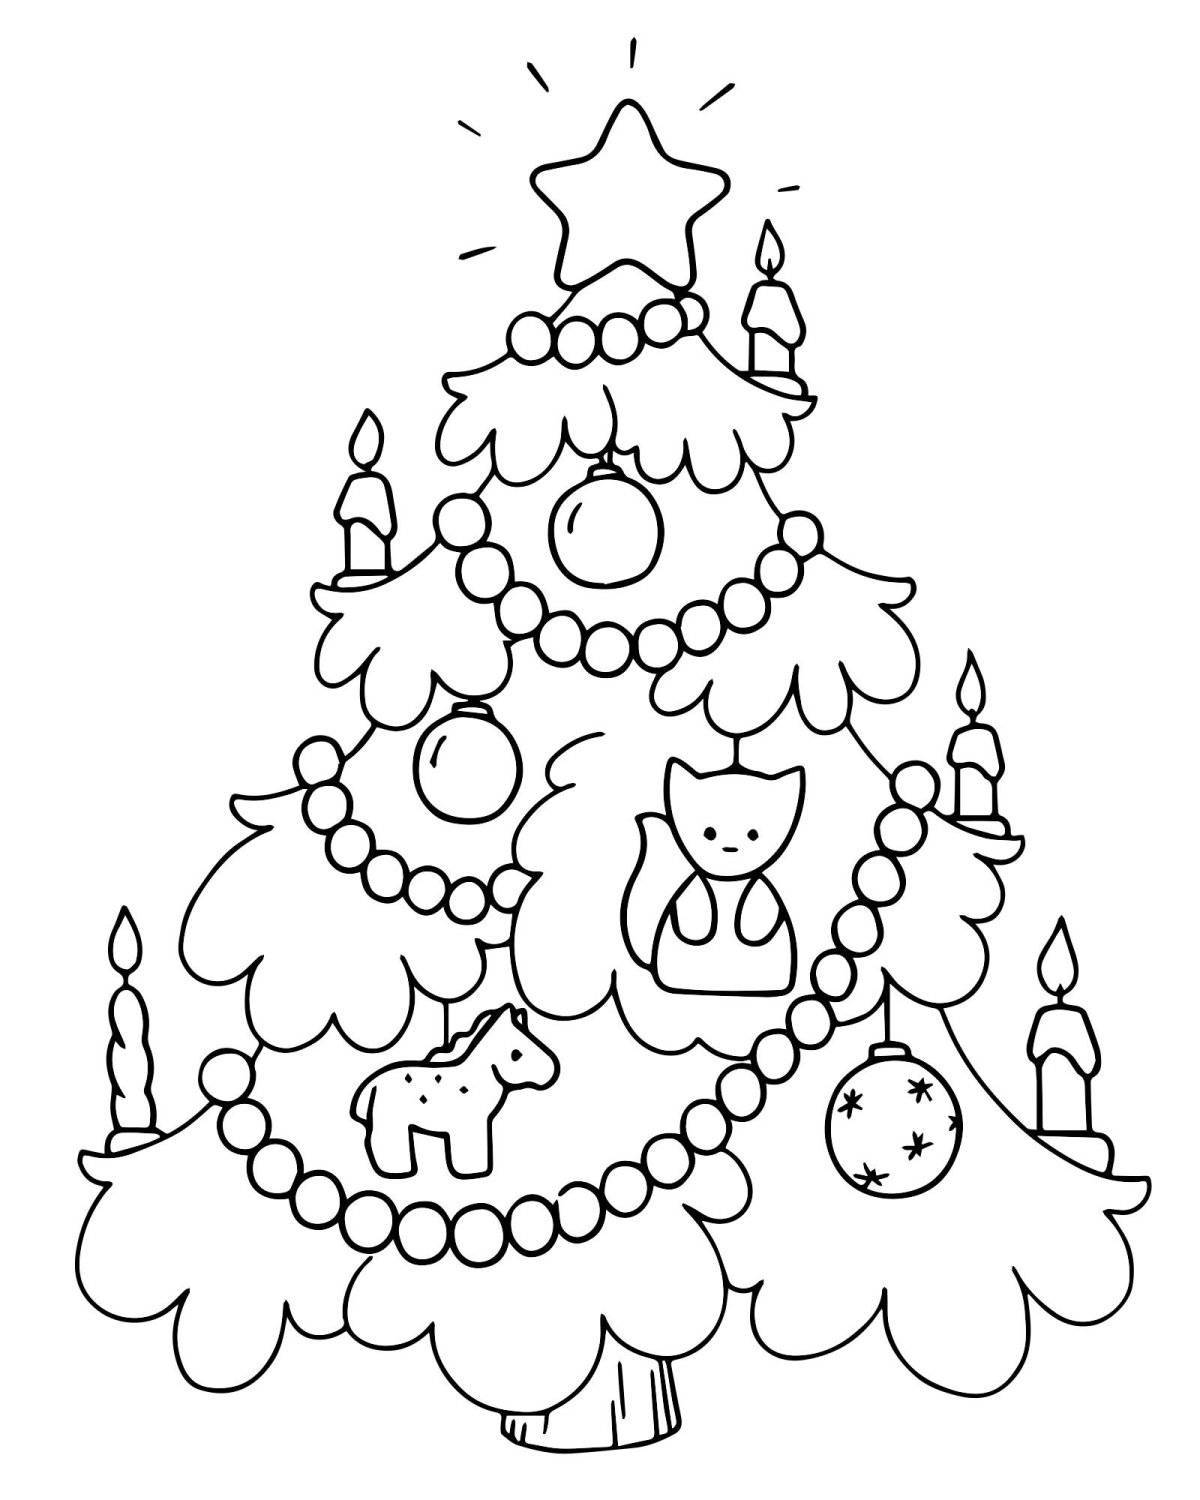 Sparkling Christmas tree with toys